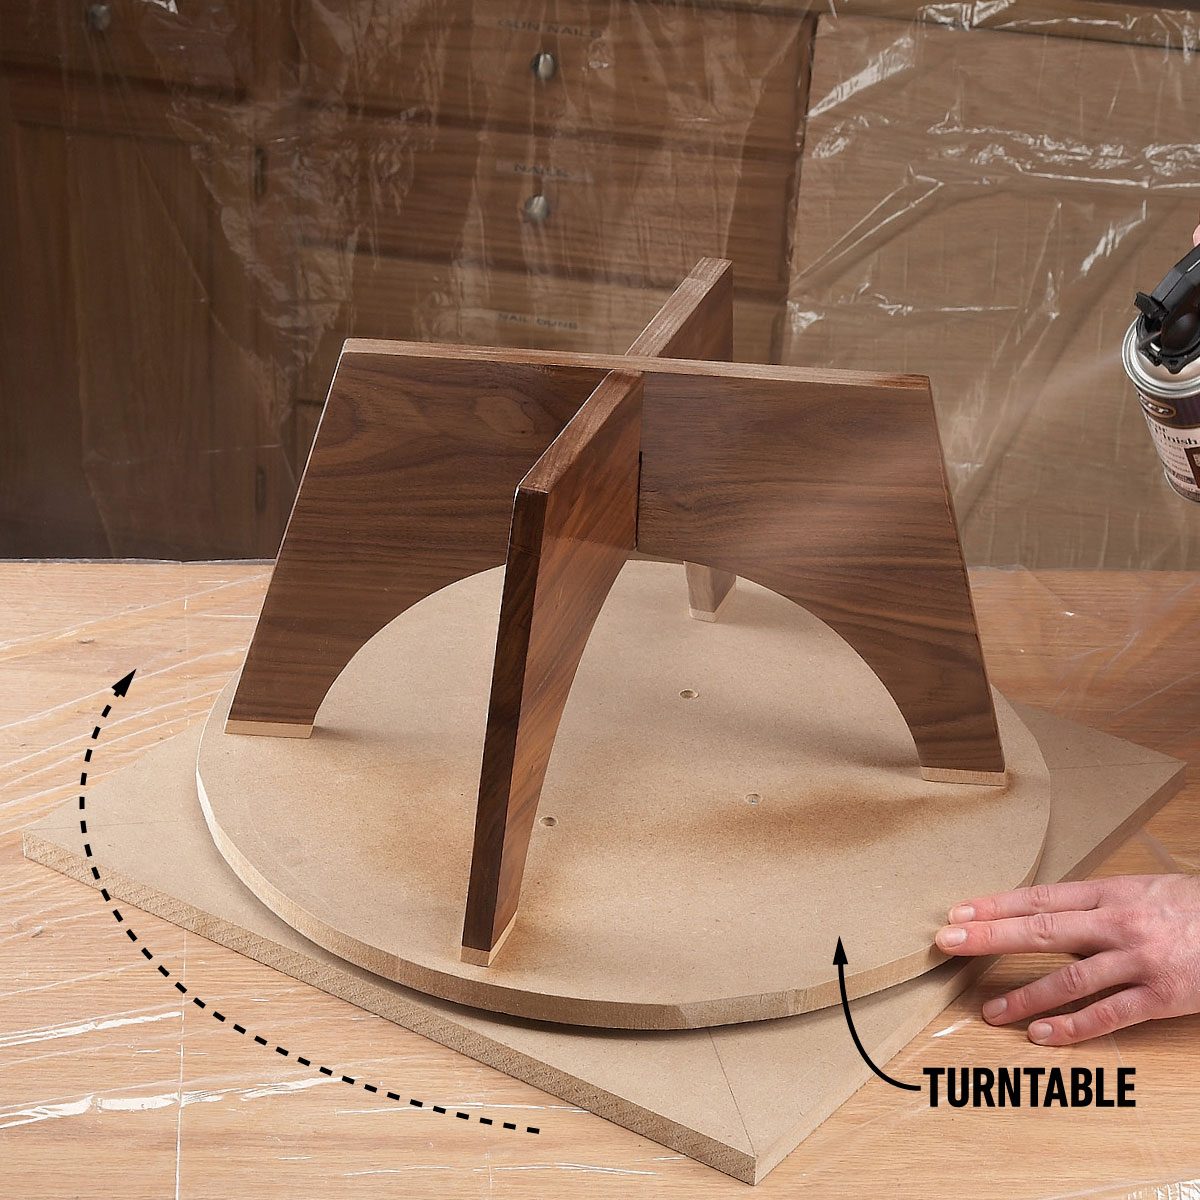 9 Tips For Spraying Varnish On Wood Build A Turntable